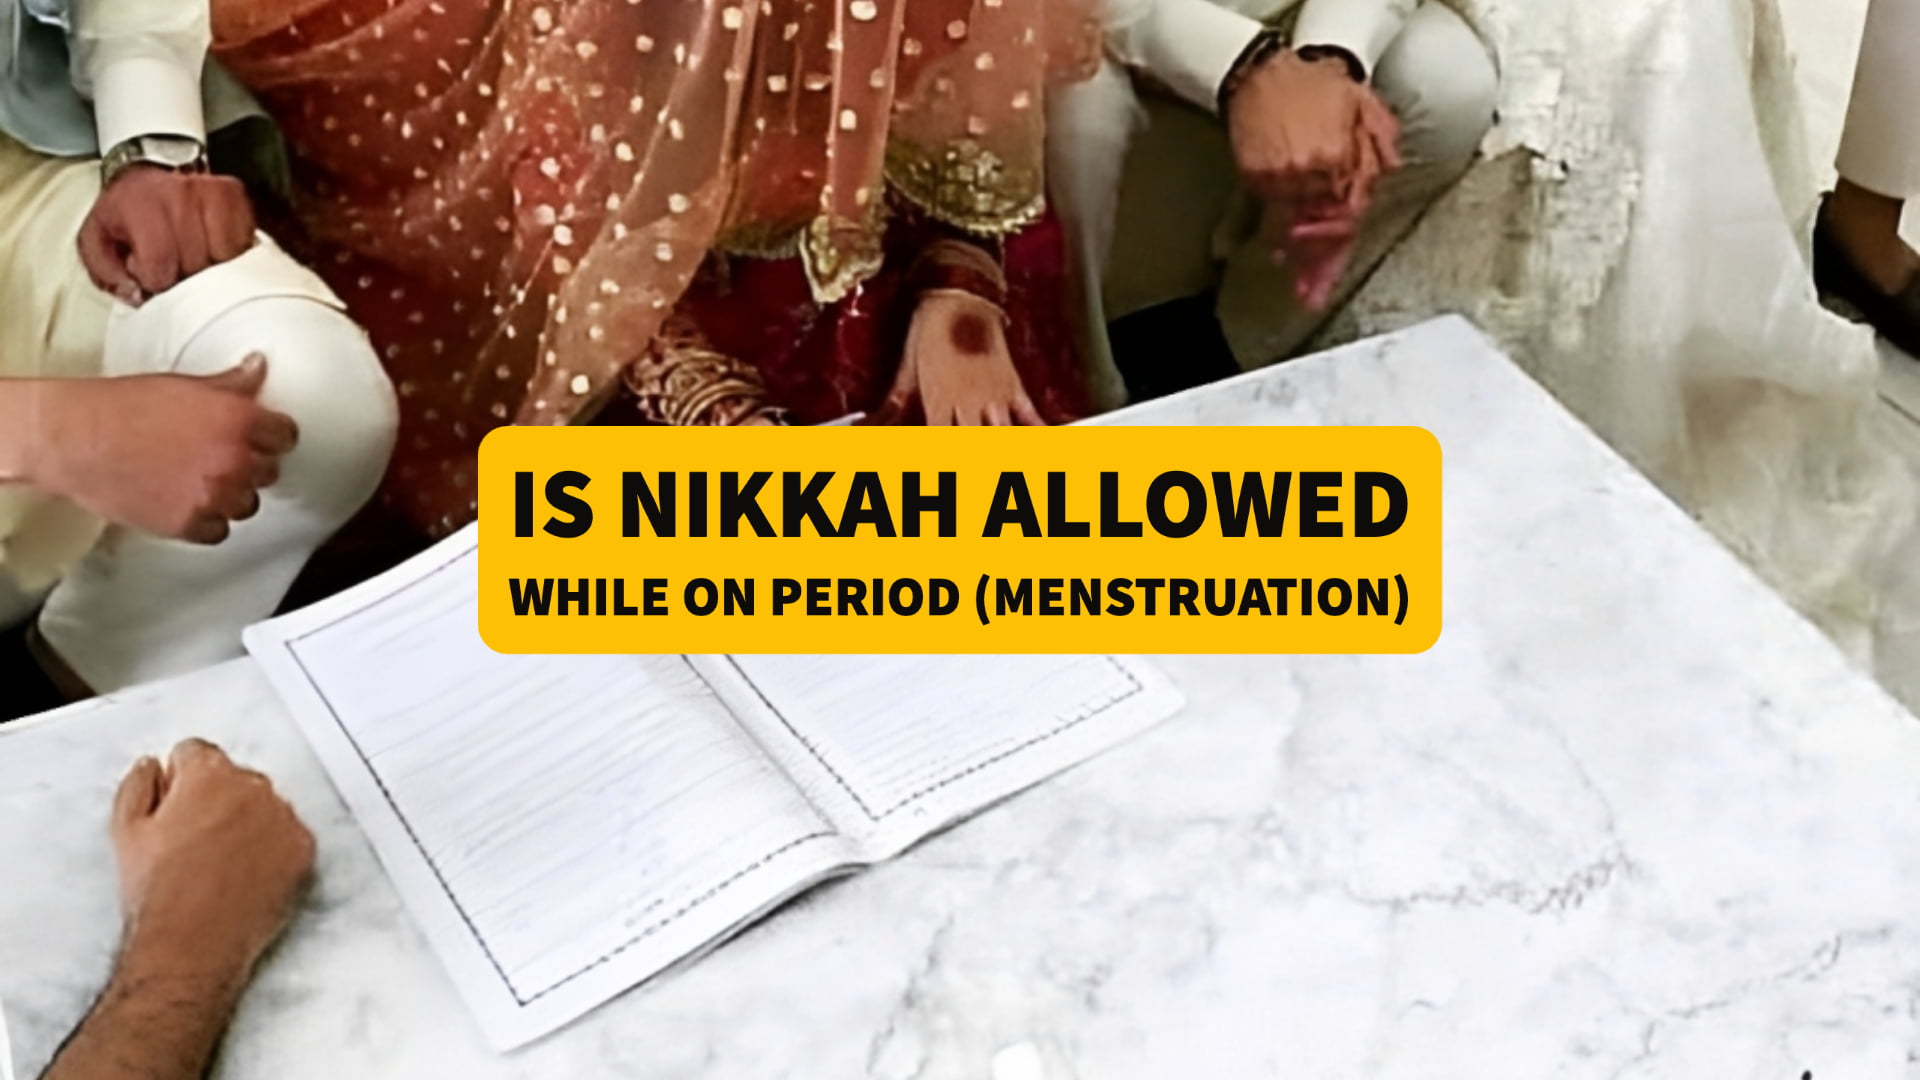 Nikkah Allowed While On Period Menstruation